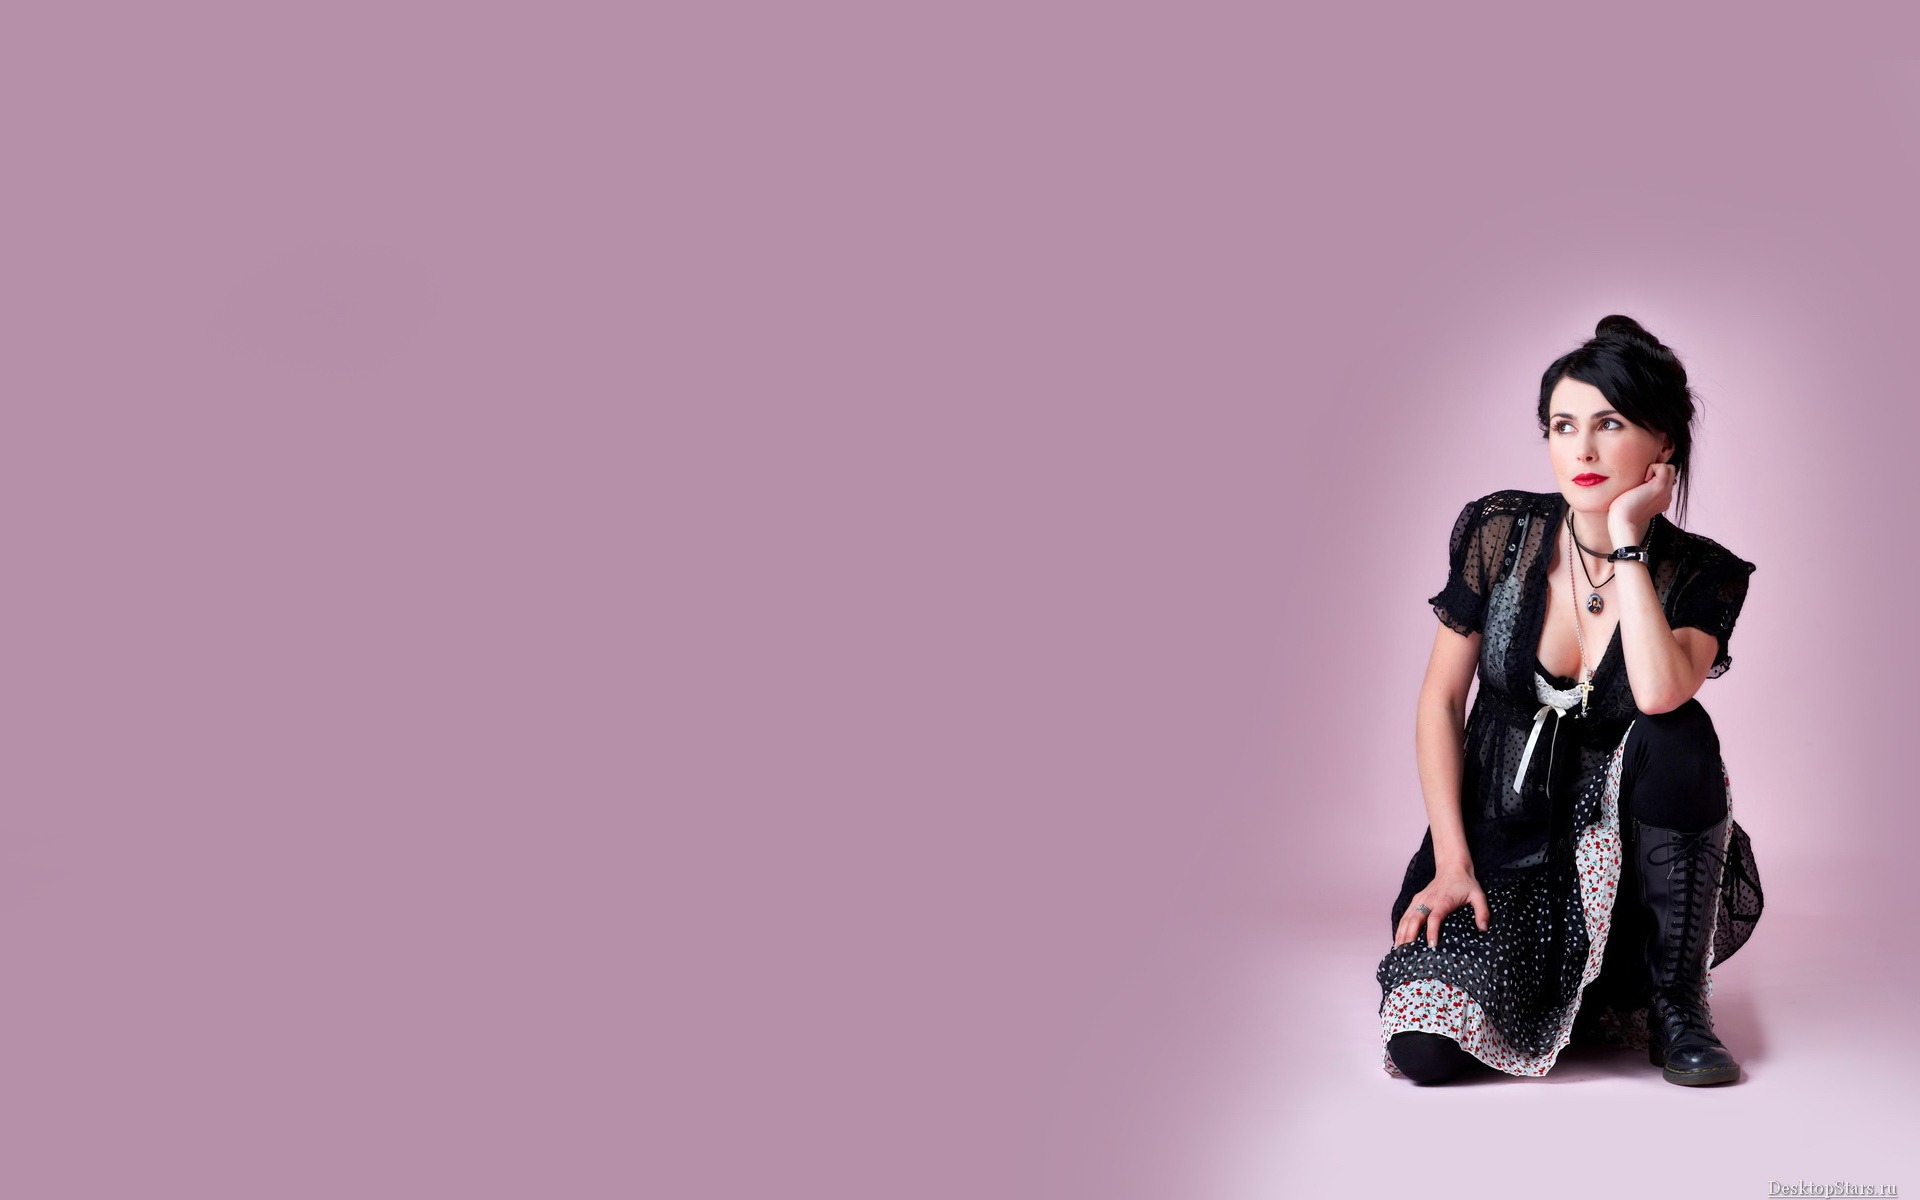 Sharon den Adel #010 - 1920x1200 Wallpapers Pictures Photos Images